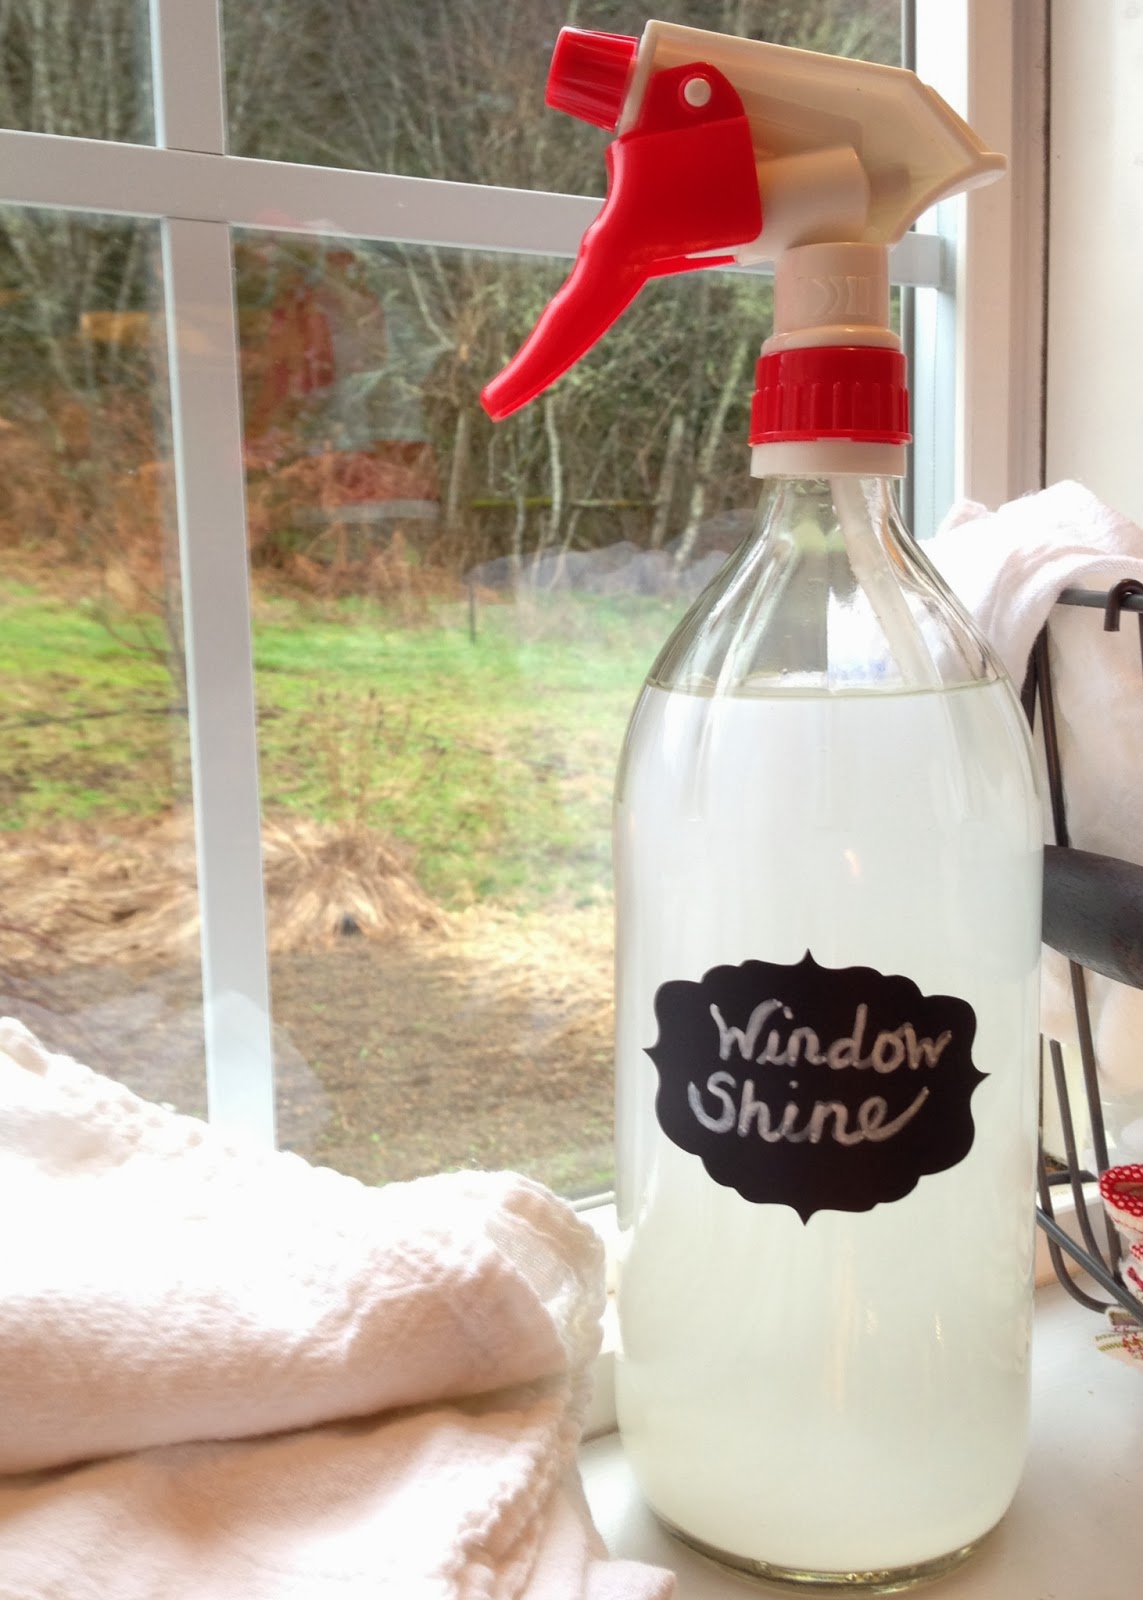 How to Make Homemade Window Cleaner - My Frugal Adventures